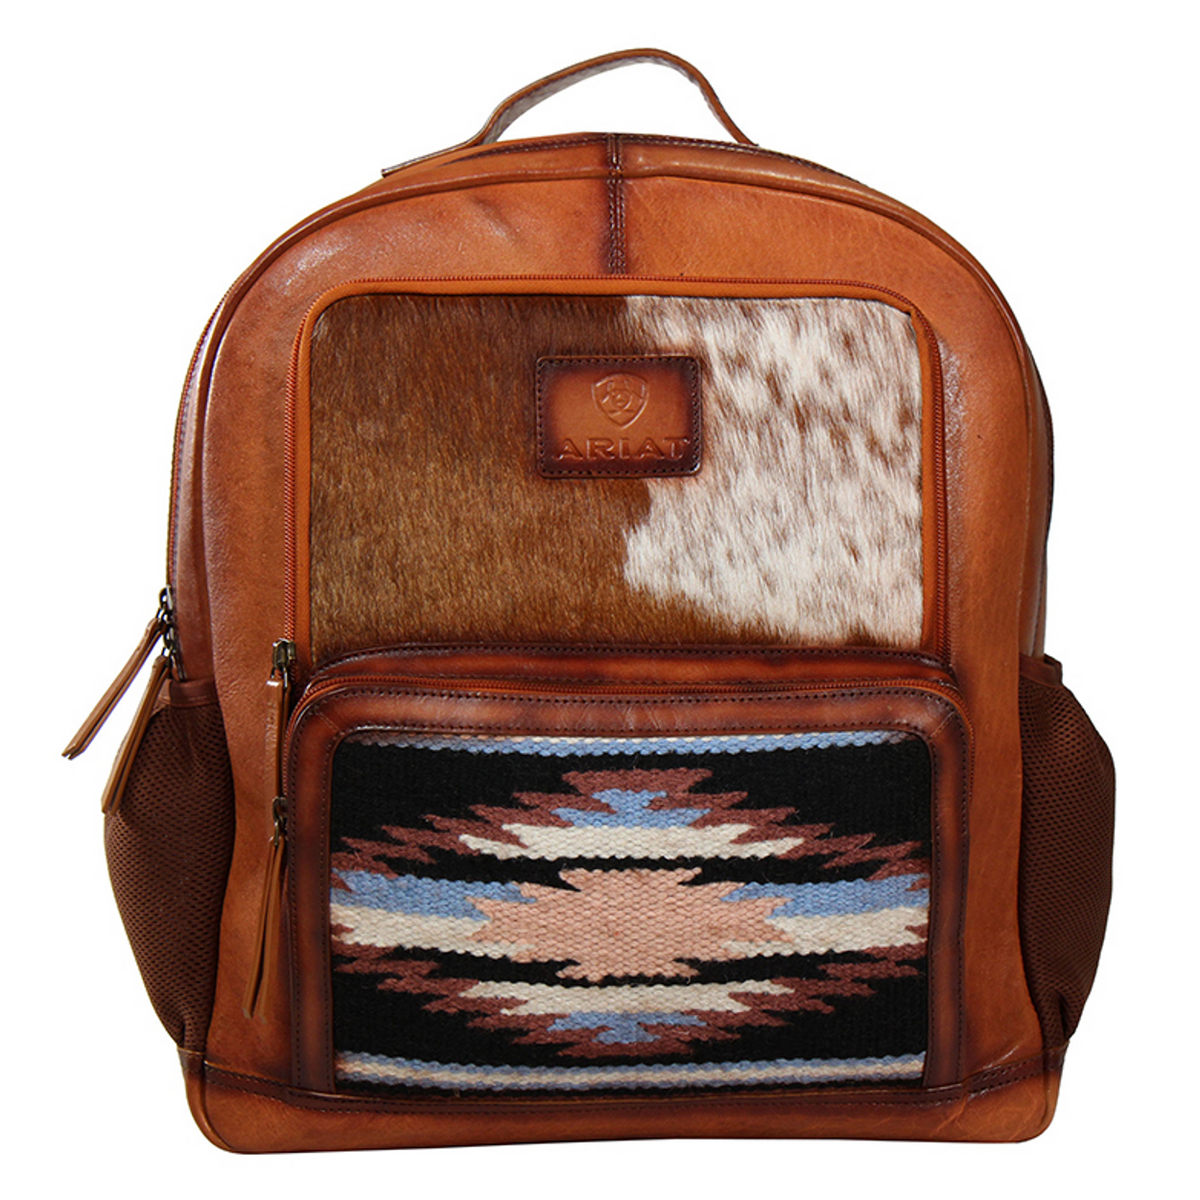 Ariat Aztec Rug and Calf Hair Leather Backpack